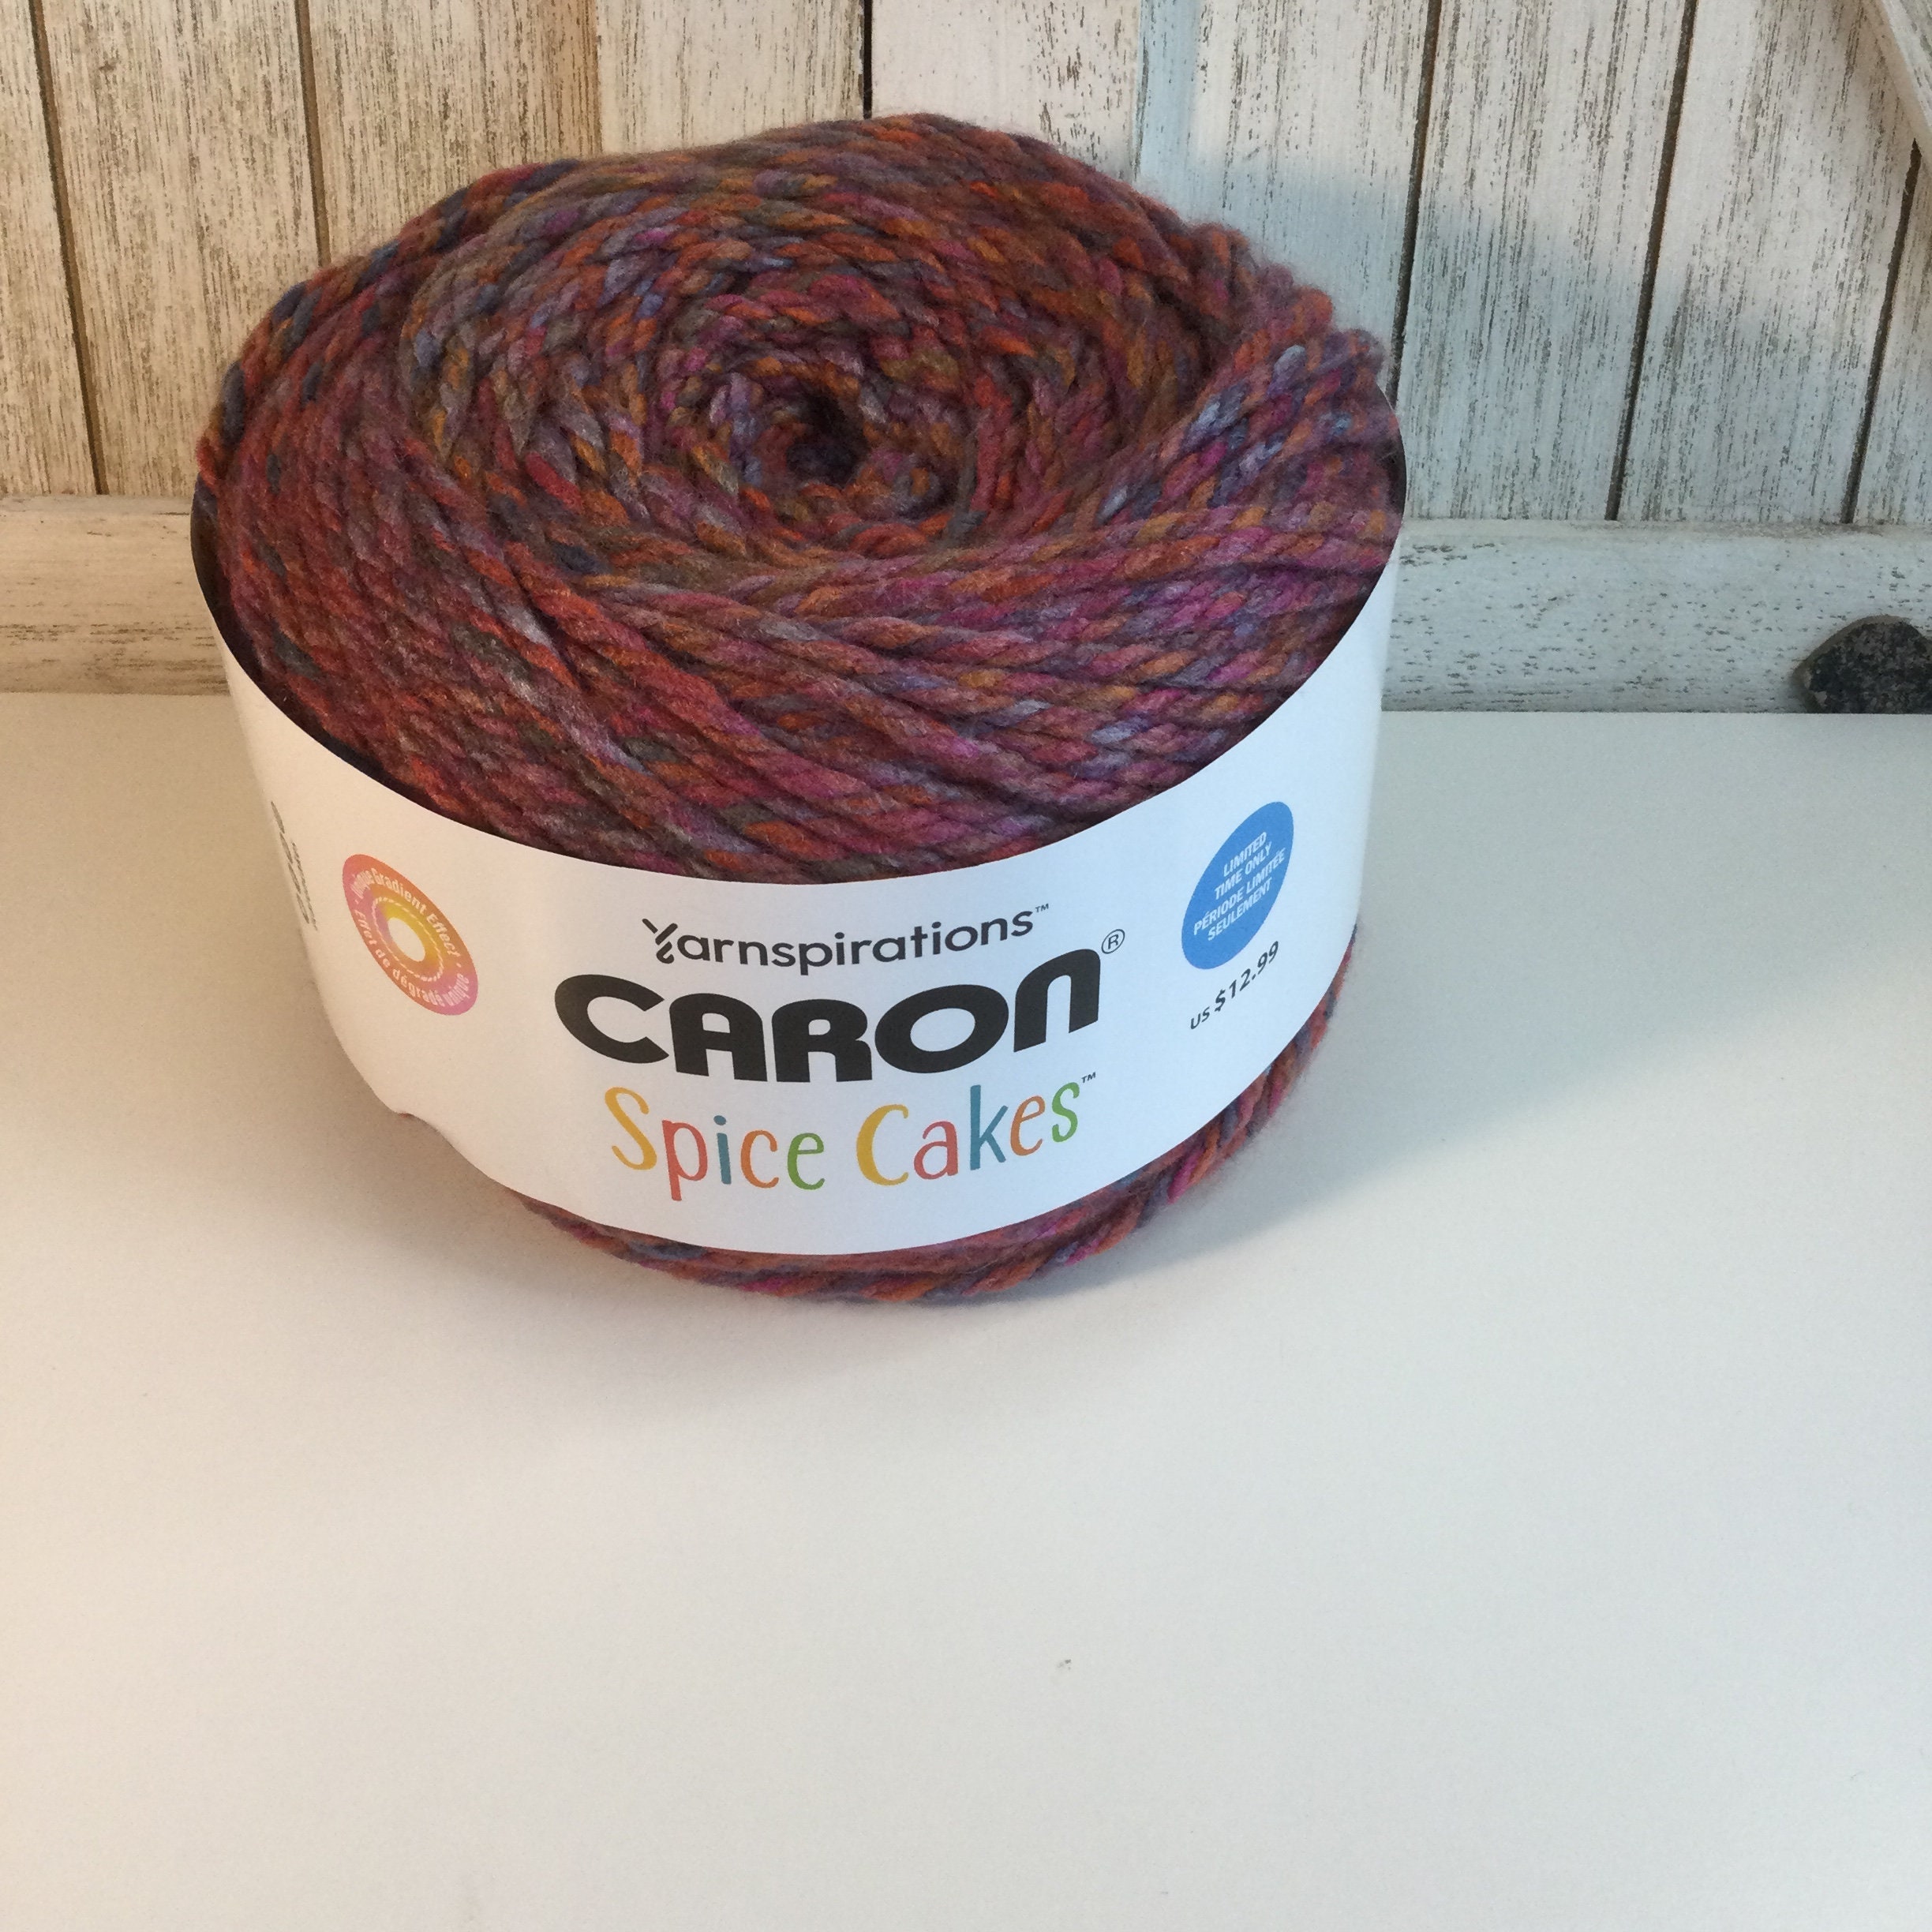 Caron Cloud Cakes Discontinued New and Unused You Choose the Color